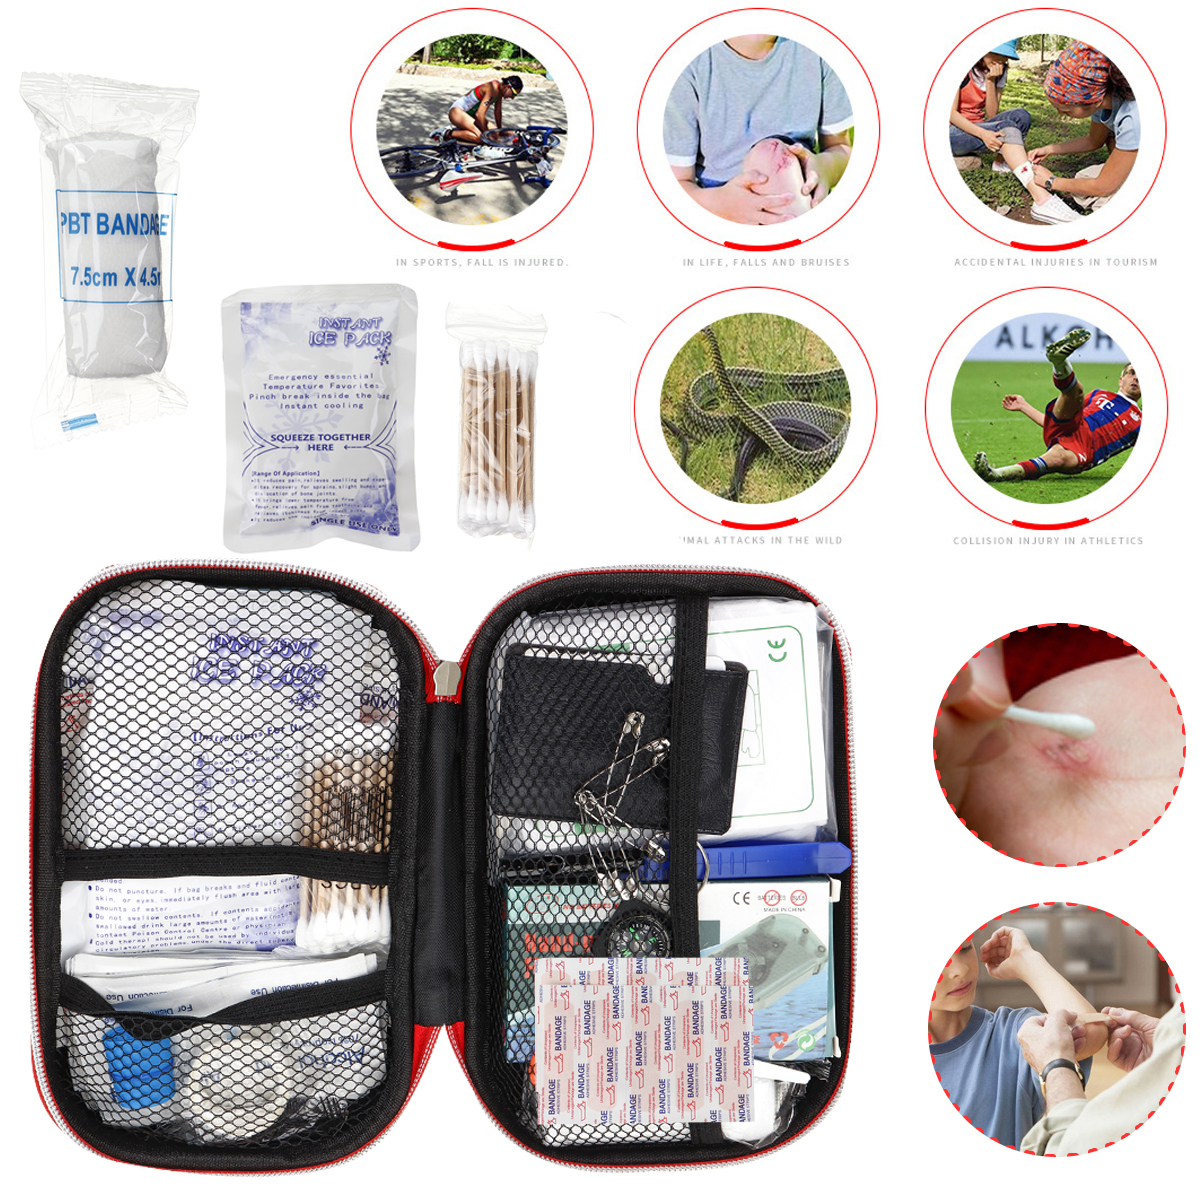 Upgraded-Outdoor-Emergency-Survival-First-Aid-Kit-Gear-for-Home-Office-Car-Boat-Camping-Hiking-Trave-1415500-5